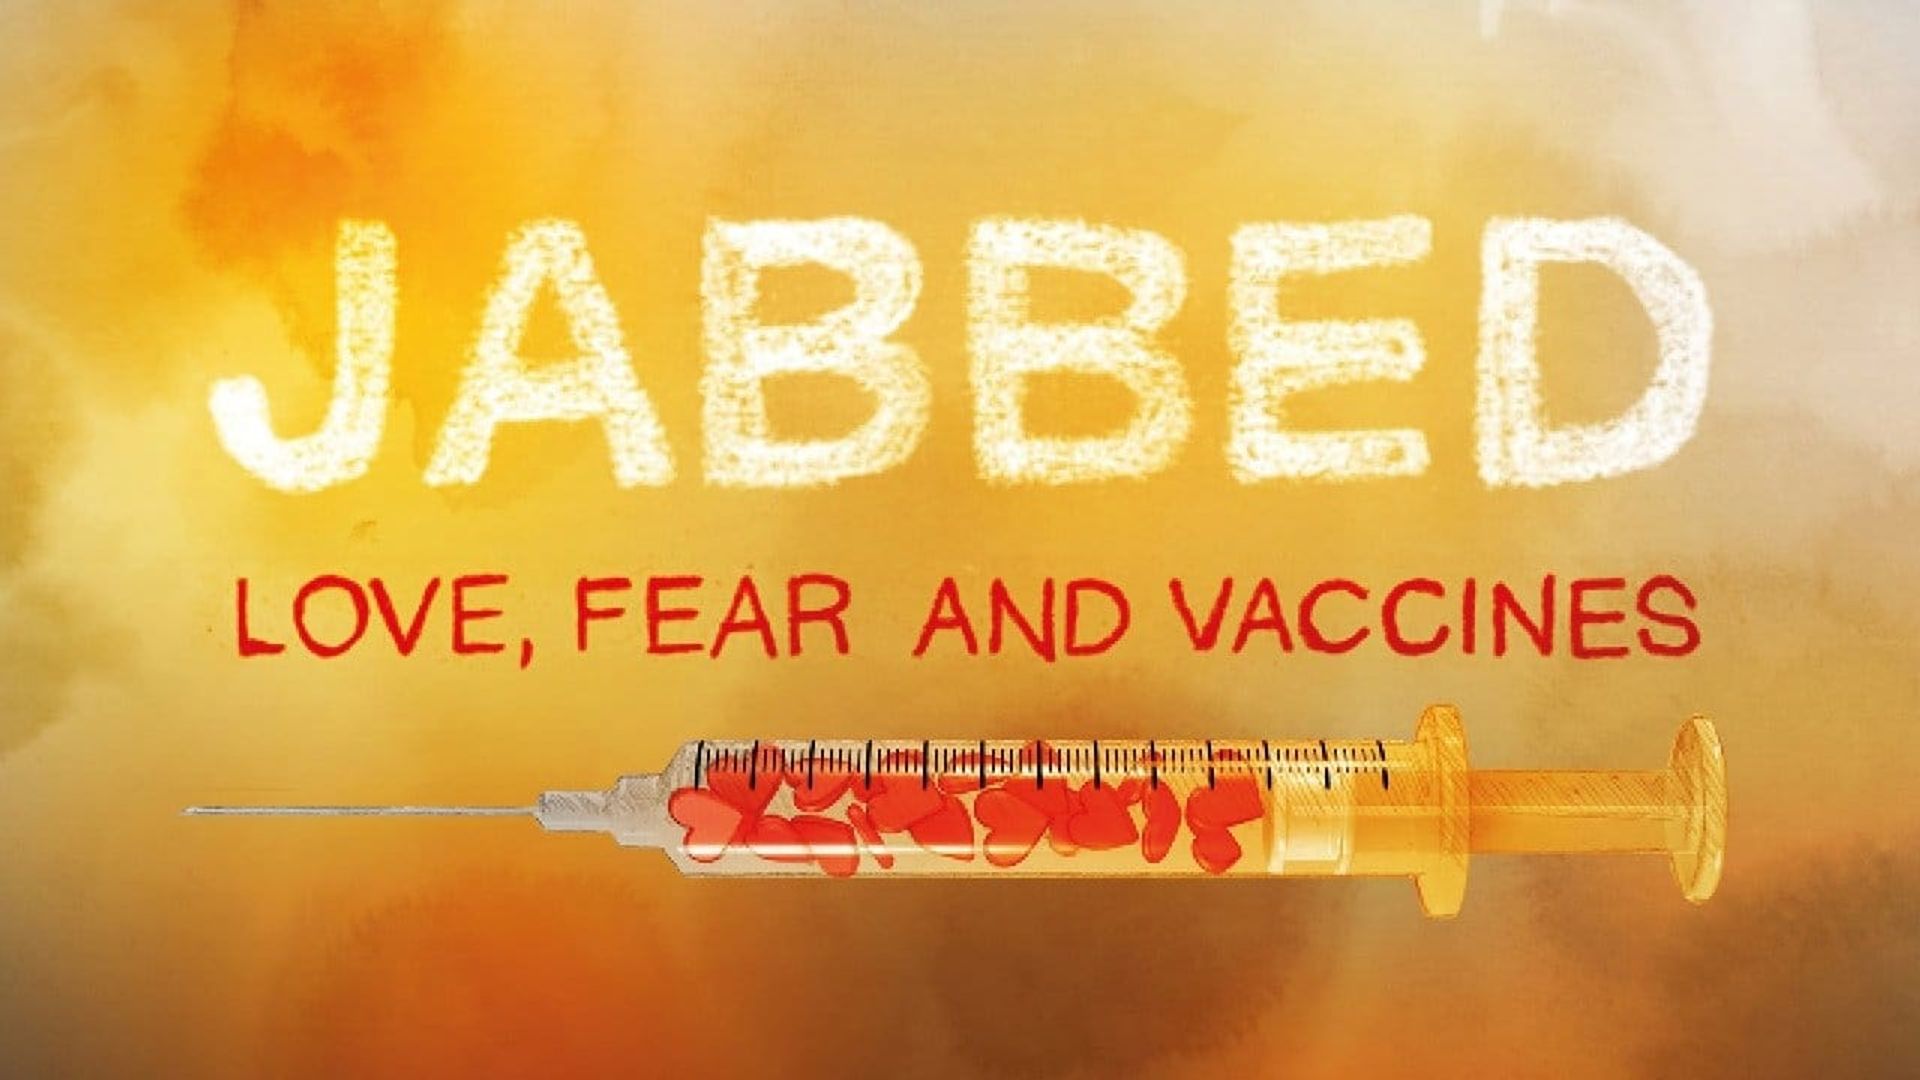 Jabbed: Love, Fear and Vaccines background